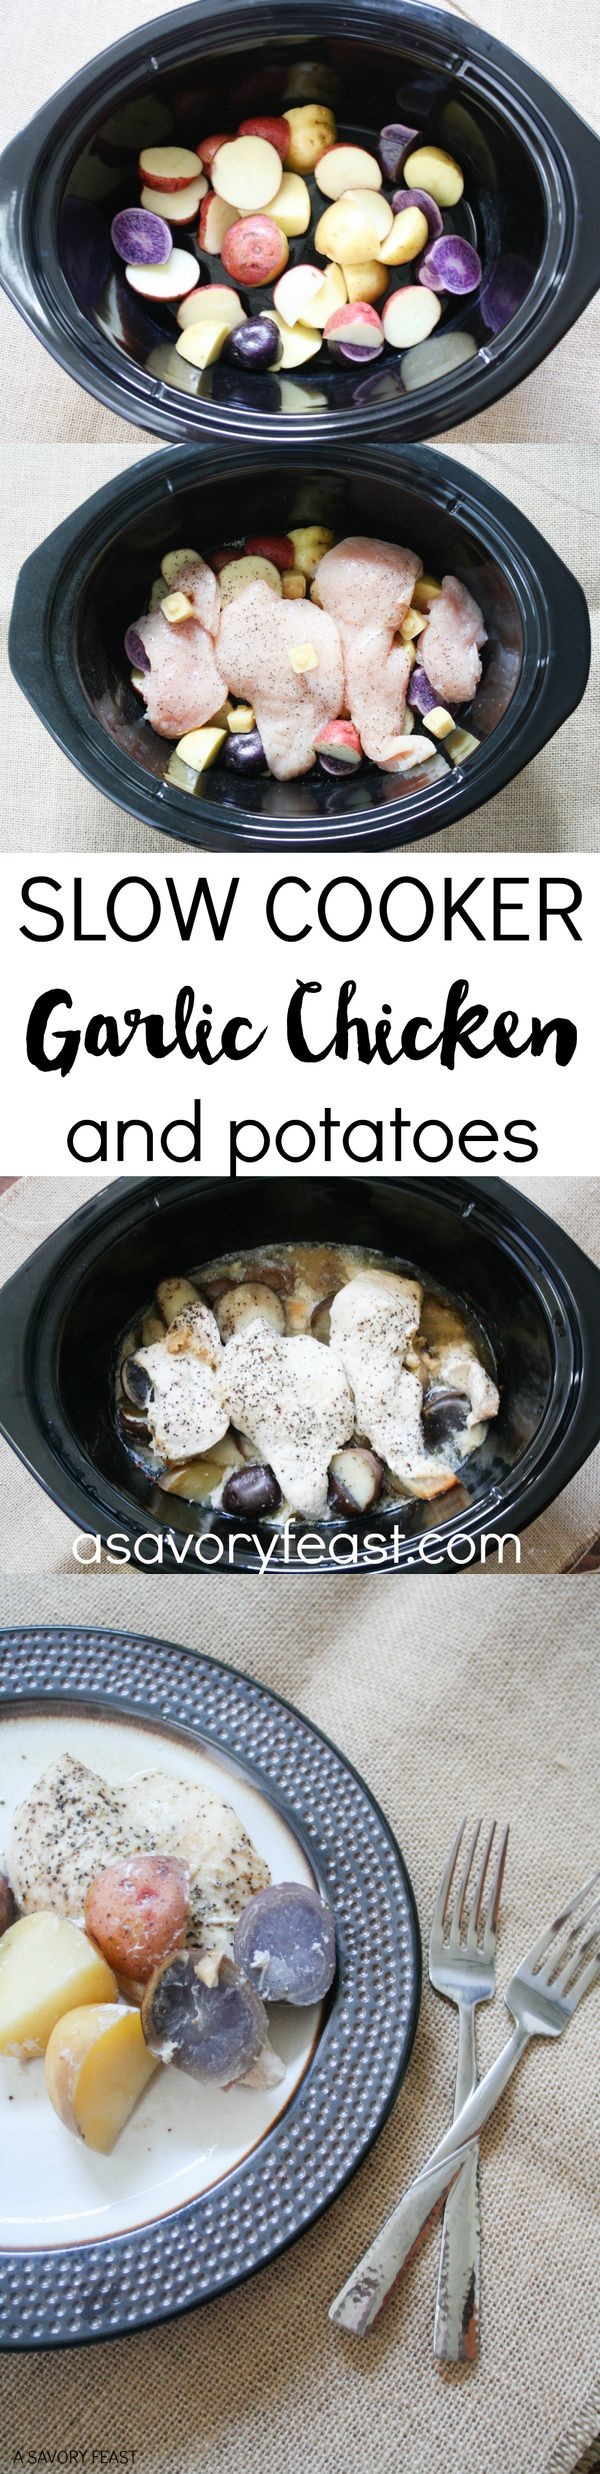 Slow Cooker Garlic Chicken and Potatoes